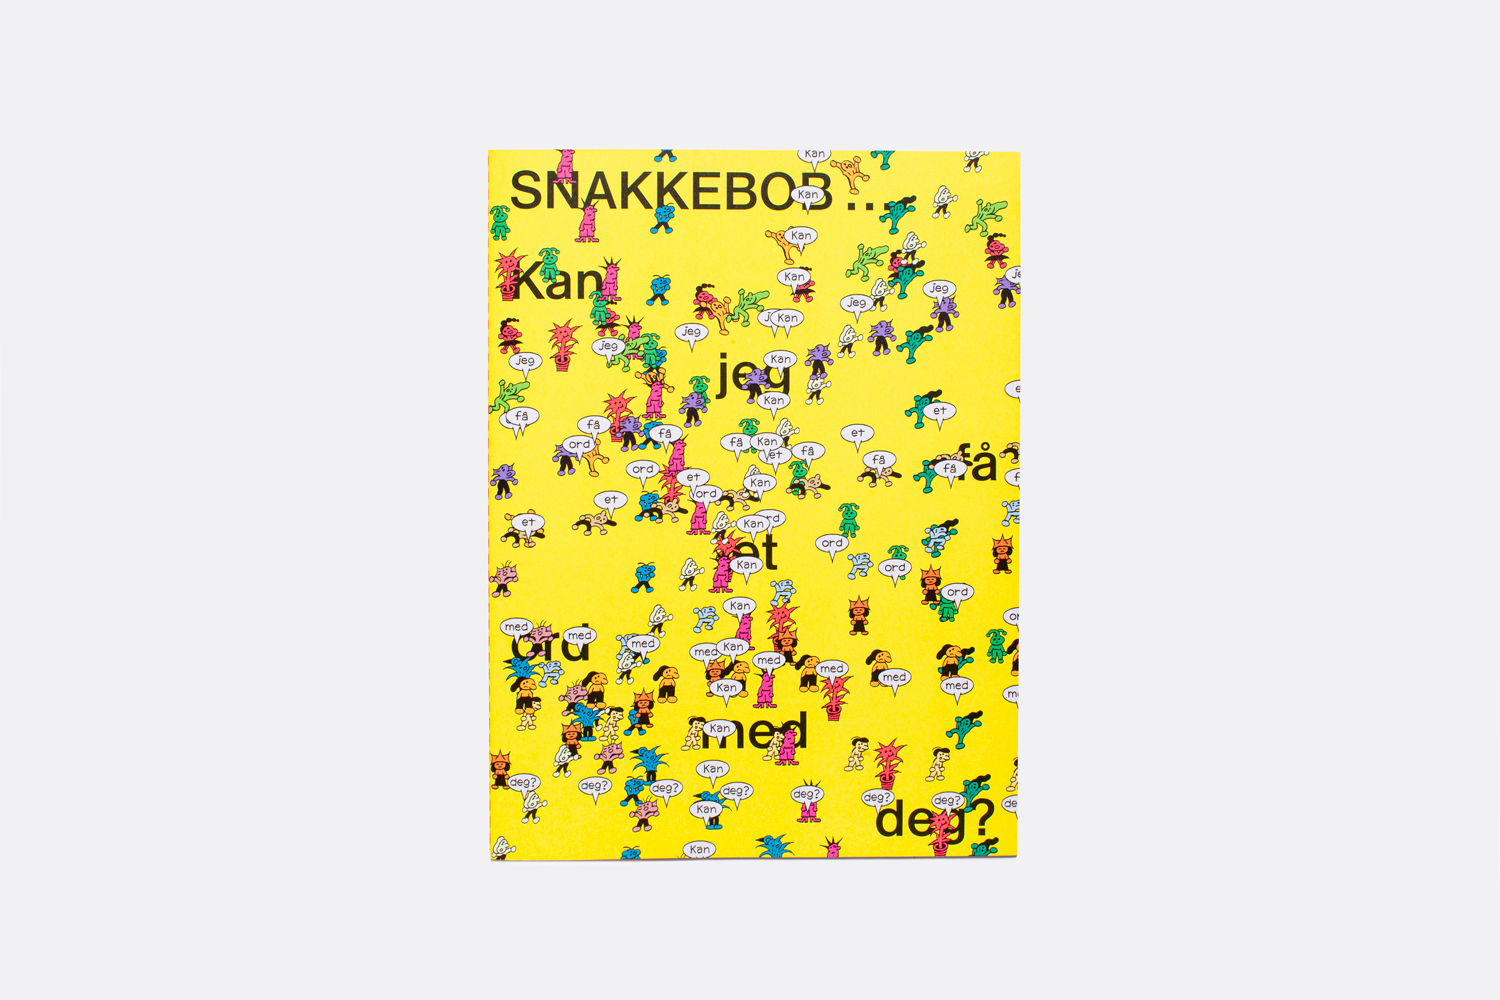 SNAKKEBOB ... Can I Have a Word With You?